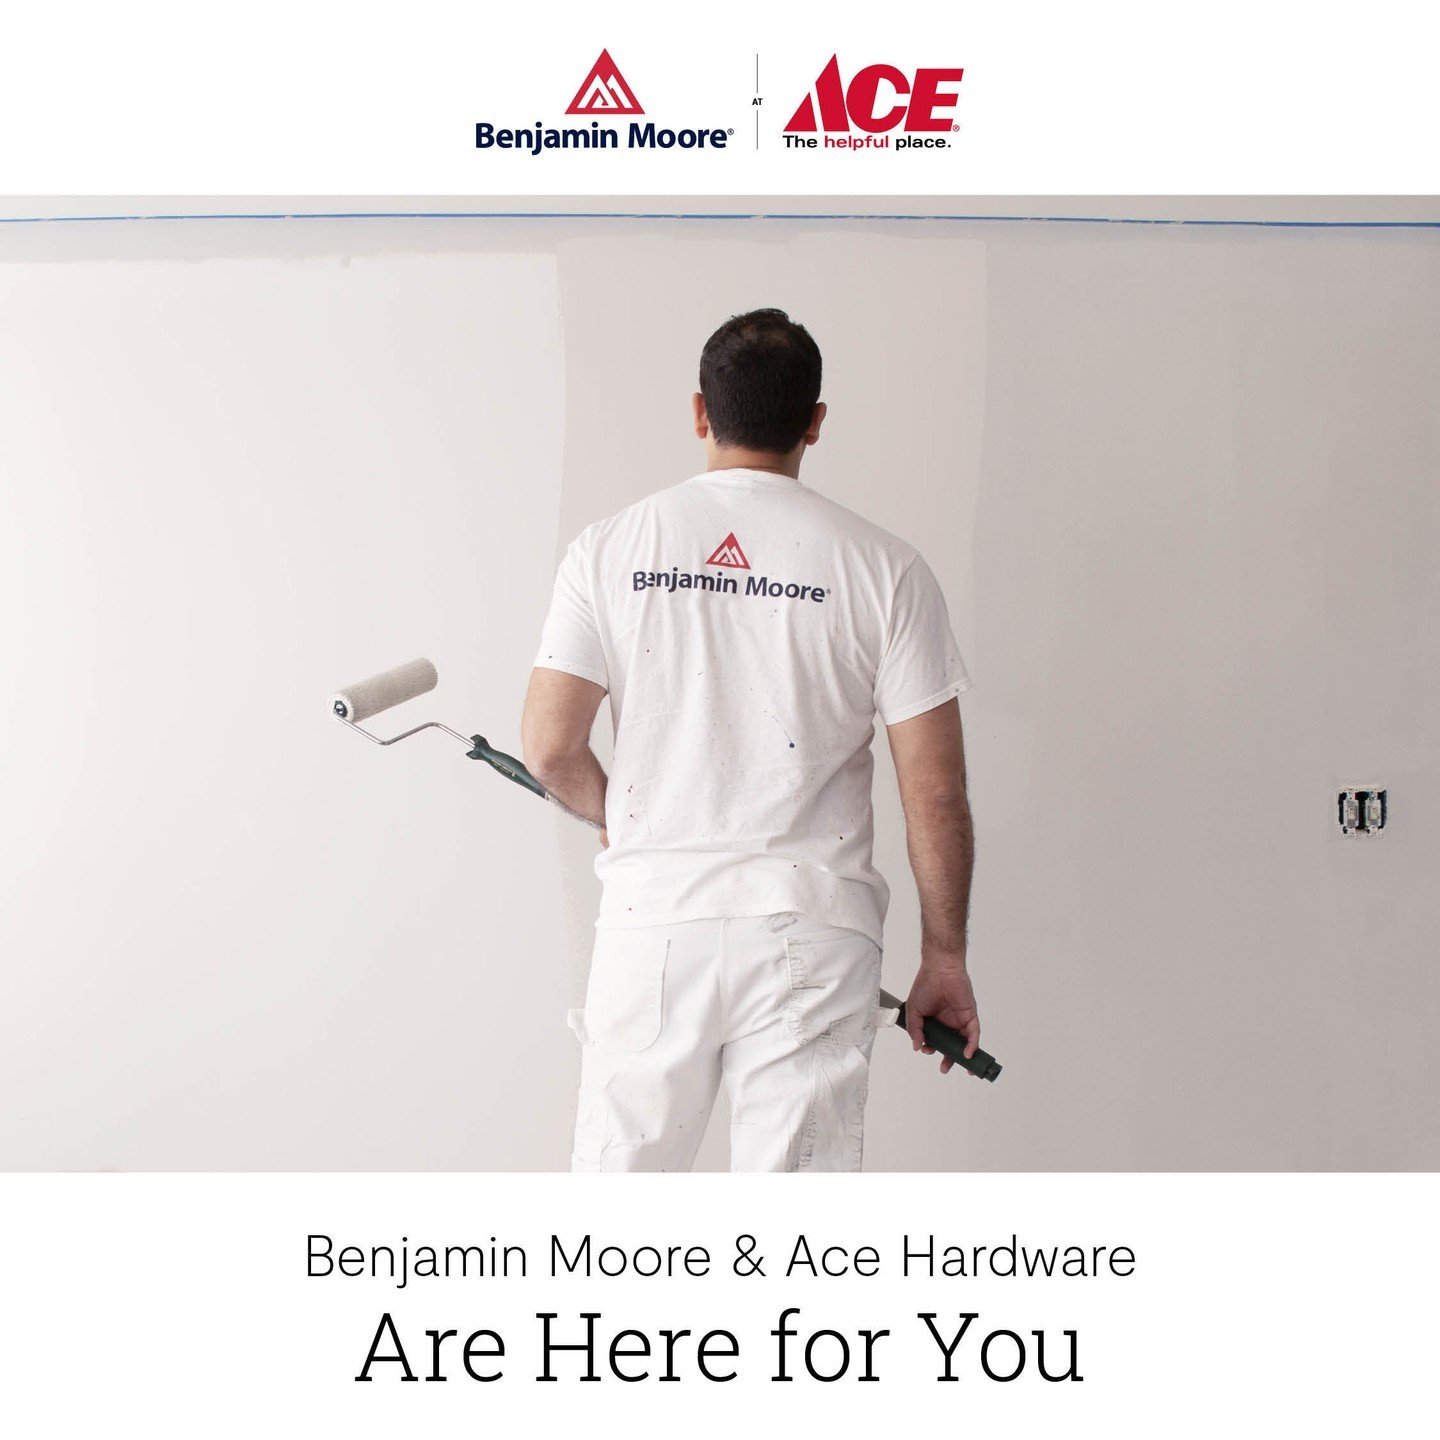 Visit Maine Hardware for top-quality Benjamin Moore interior and exterior architectural paints, primers, and stains. Get exceptional service, paint advice, and color matching from our expert staff. #MyLocalAce #AceHardware #BenjaminMoore #MaineHardwa